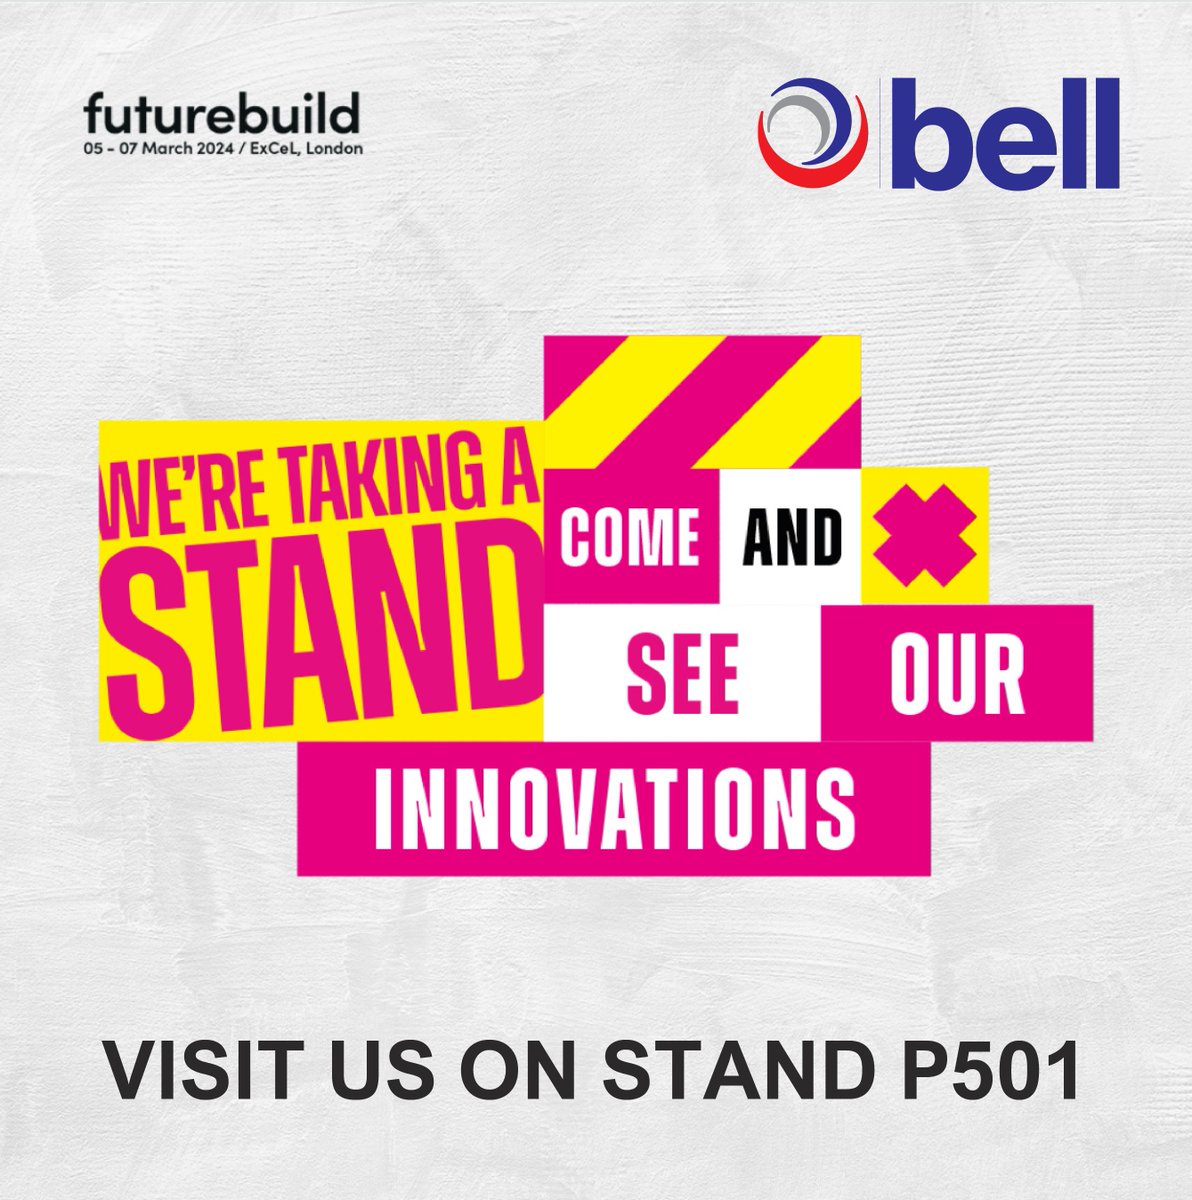 We're taking a stand at Futurebuild 2024! Register to visit us on stand P501 ow.ly/2Rsb50QEVMF #takeastand #bebell